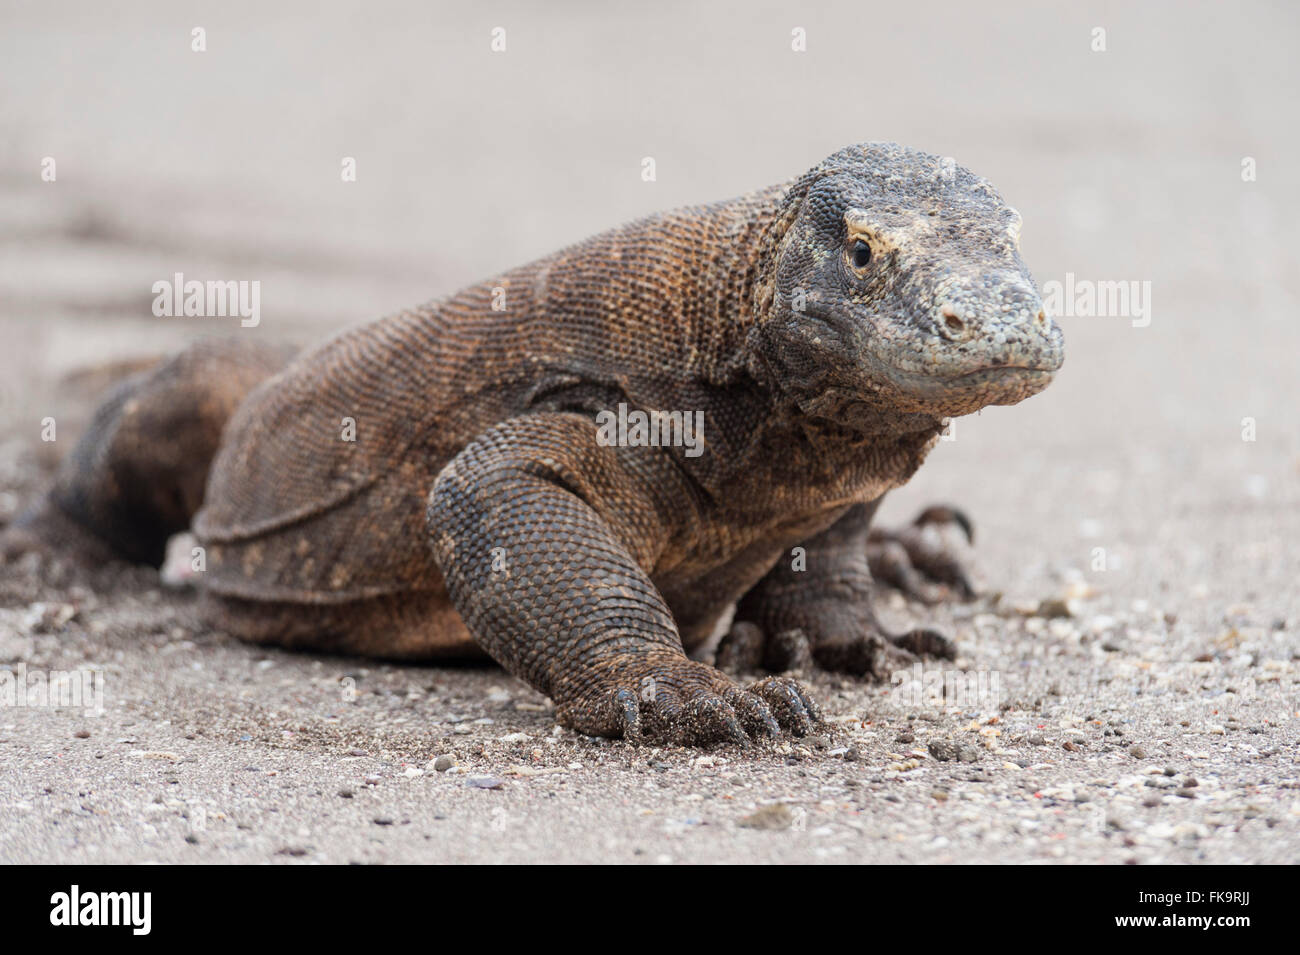 The Komodo dragon (Varanus komodoensis) is a large species of lizard found in the Indonesian islands of Komodo. It is the larges Stock Photo